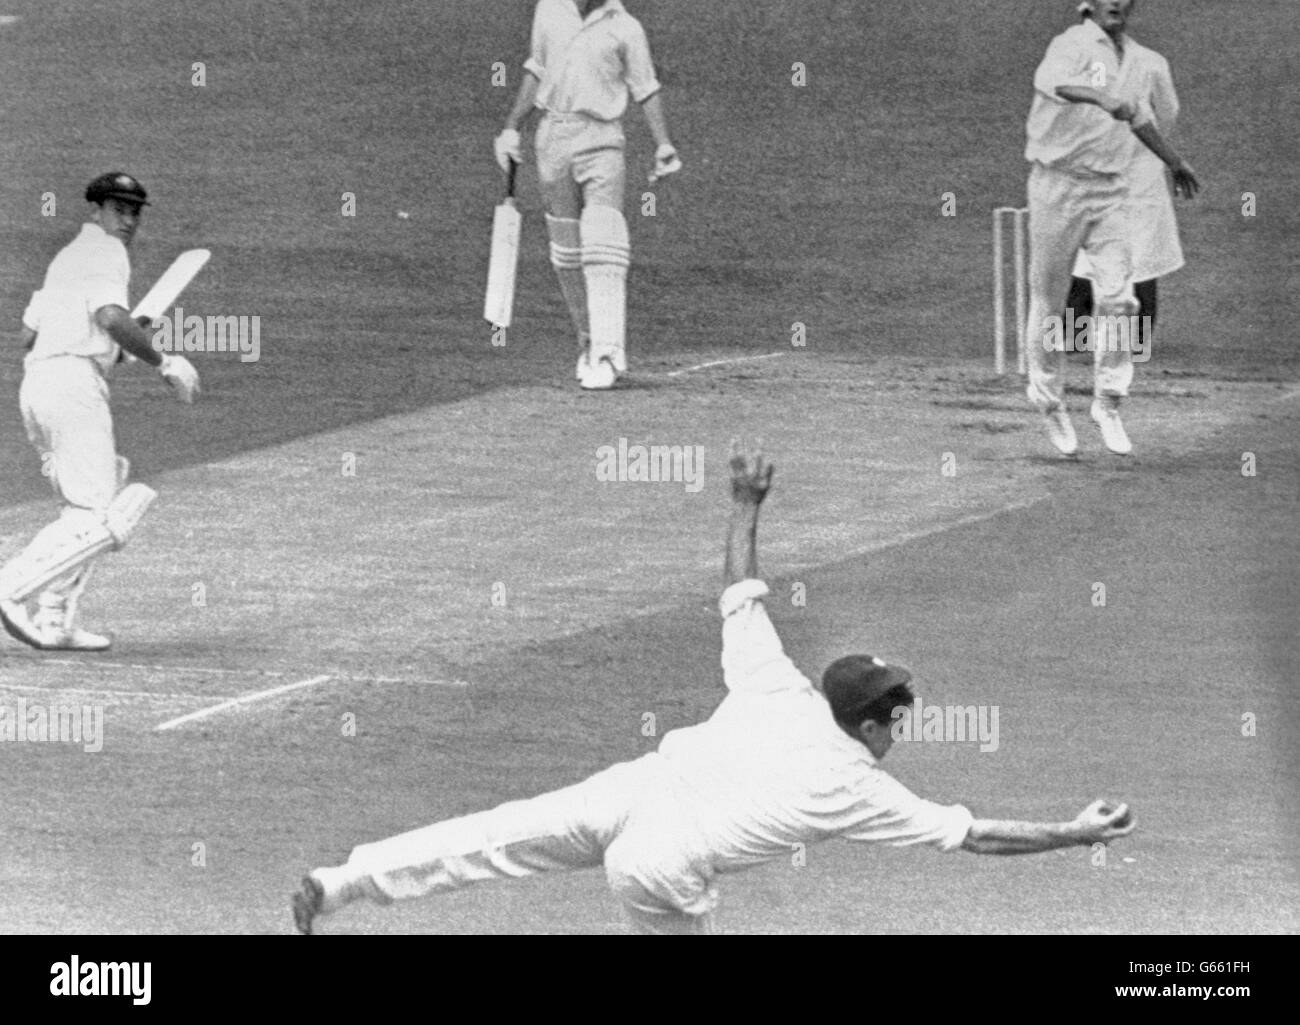 Cricket - Yorkshire v Australia - Day 2 - Bramall Lane, Sheffield. Fred Trueman makes a one-handed catch to end the run of Doug Walters at Bramall Lane in Sheffield. The bowler is Richard Hutton. Stock Photo